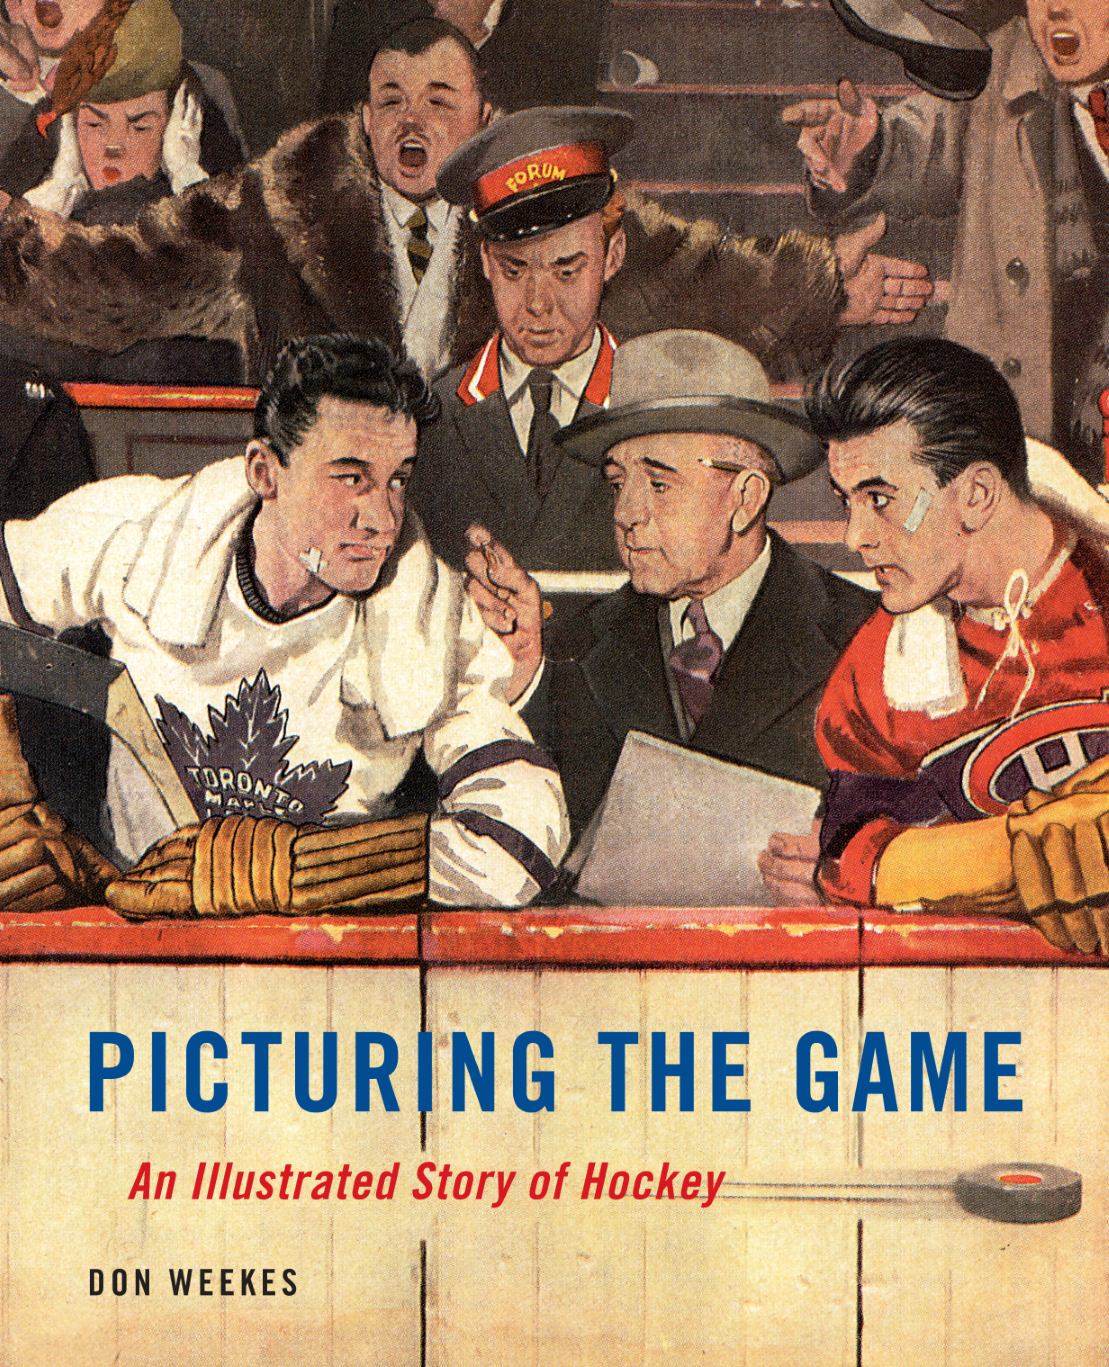 Picturing the Game: An Illustrated Story of Hockey